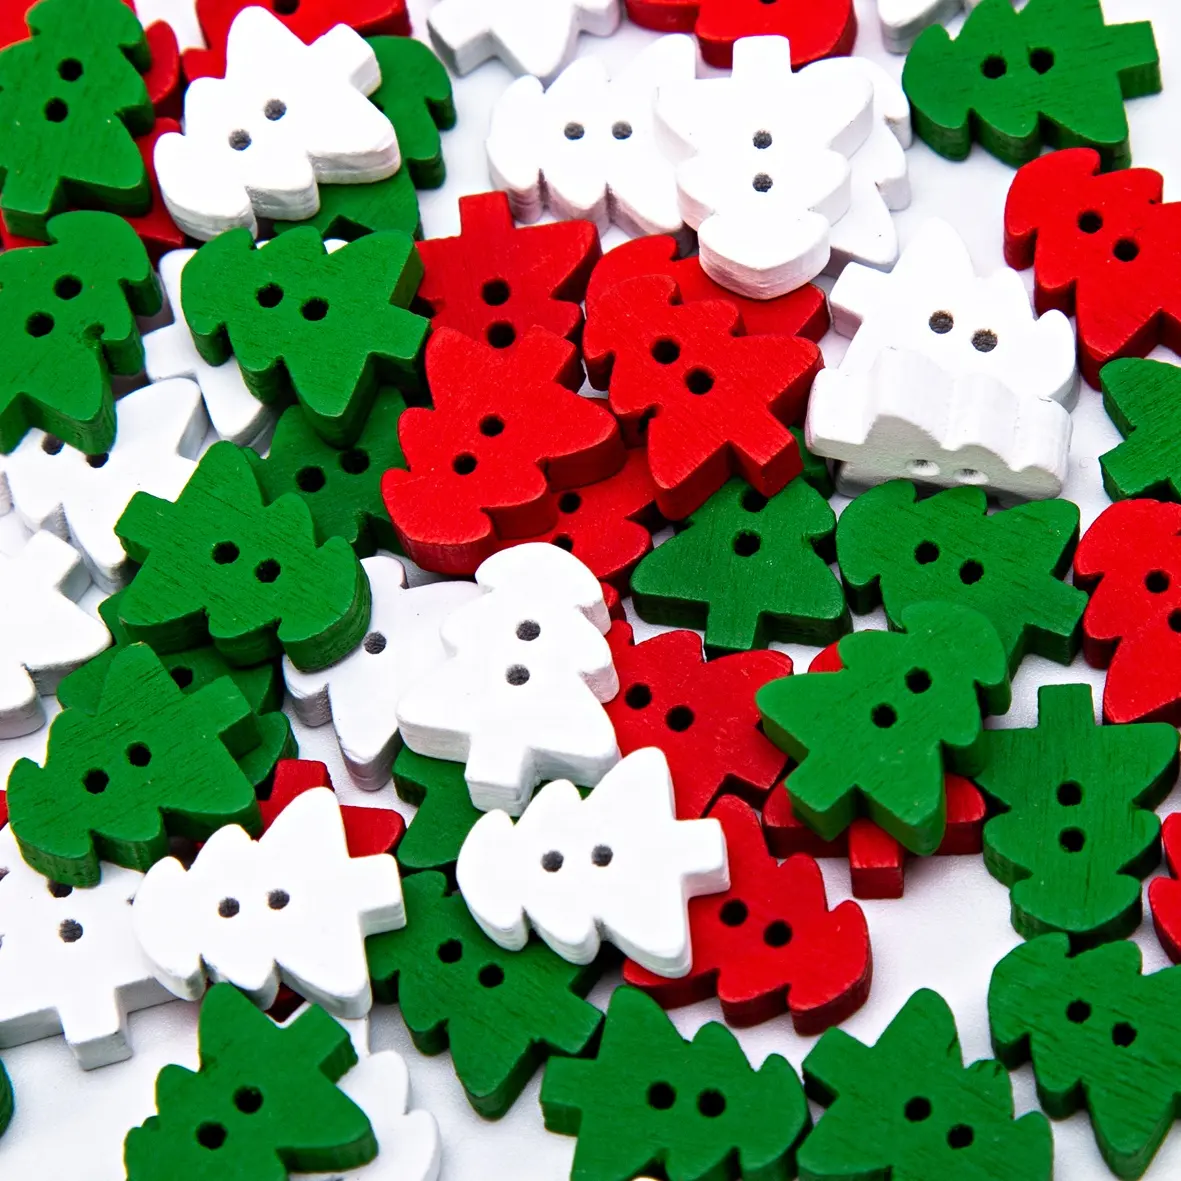 100pcs/bag 13x11mm Wood White Red Green Christmas Tree Buttons Embellishments Cardmaking Crafts Xmas 2 Holes Button